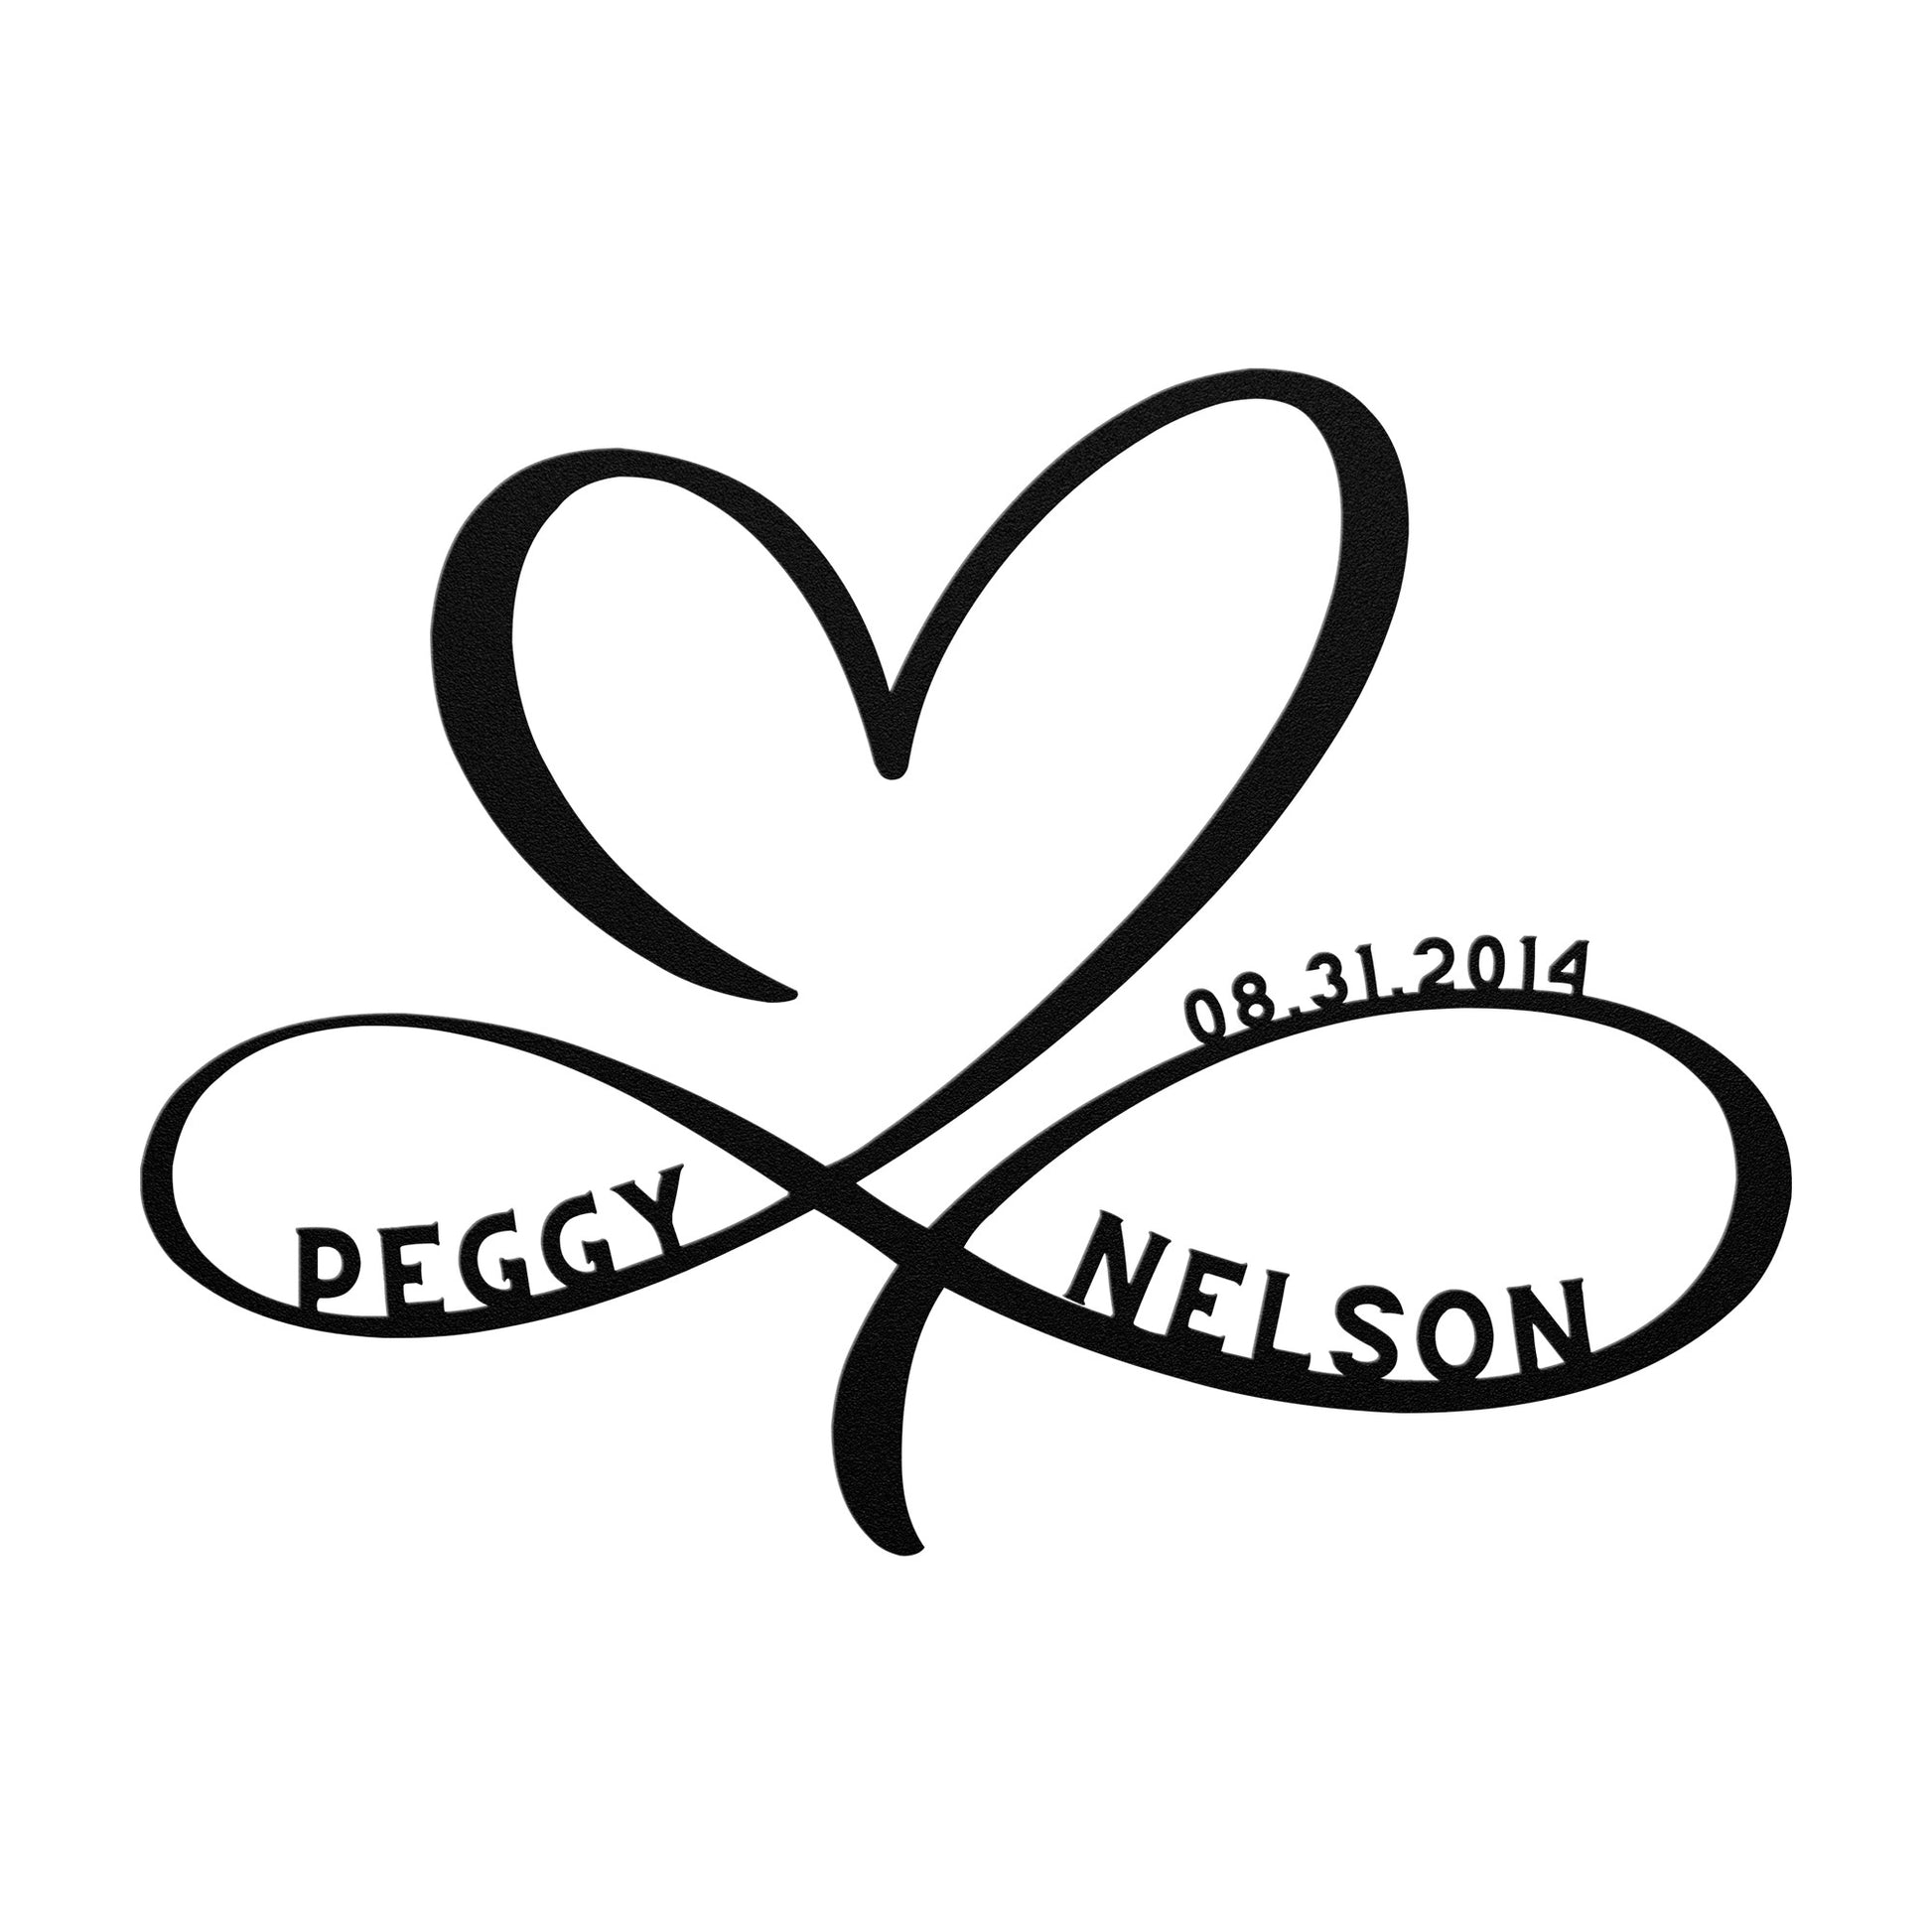 Peggy Nelson's wedding logo, featuring a teelaunch Personalized Infinity Love Heart Metal Art Sign perfect for home decor.